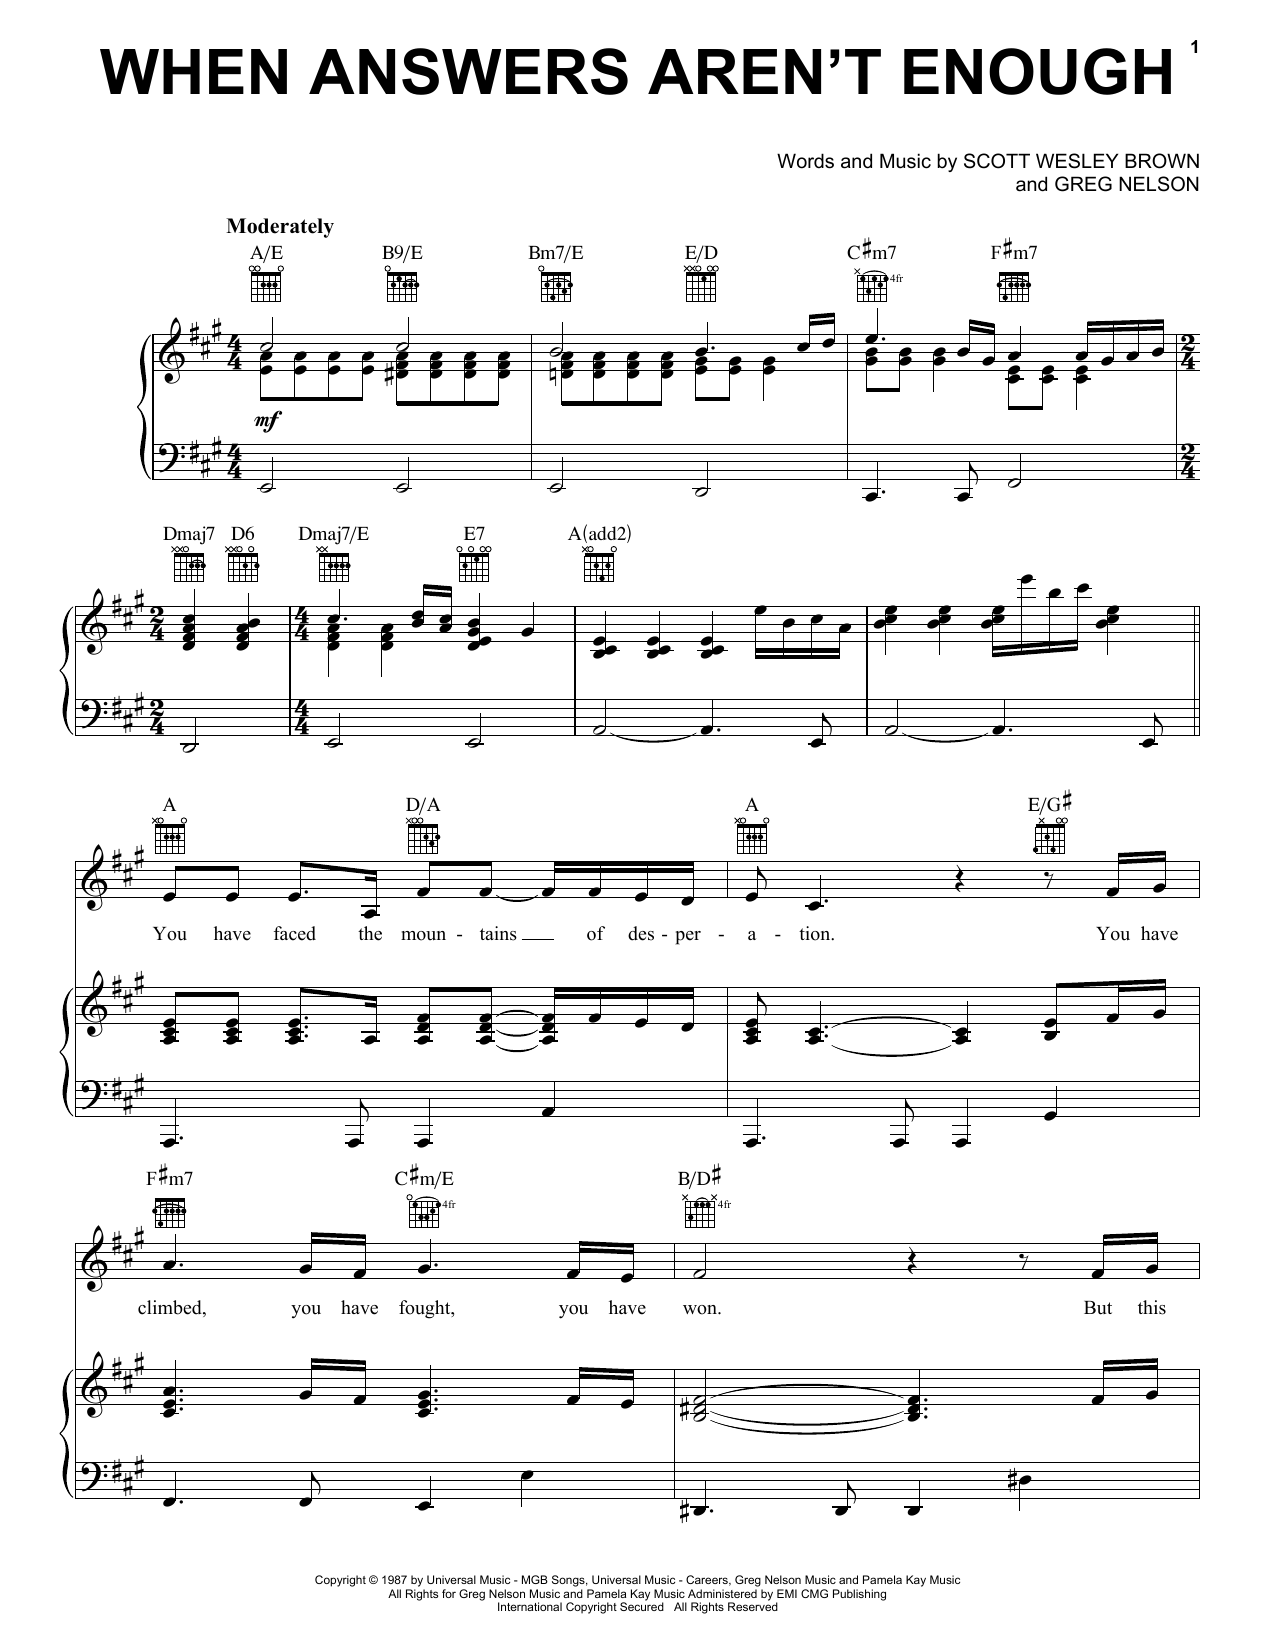 Download Scott Wesley Brown When Answers Aren't Enough Sheet Music